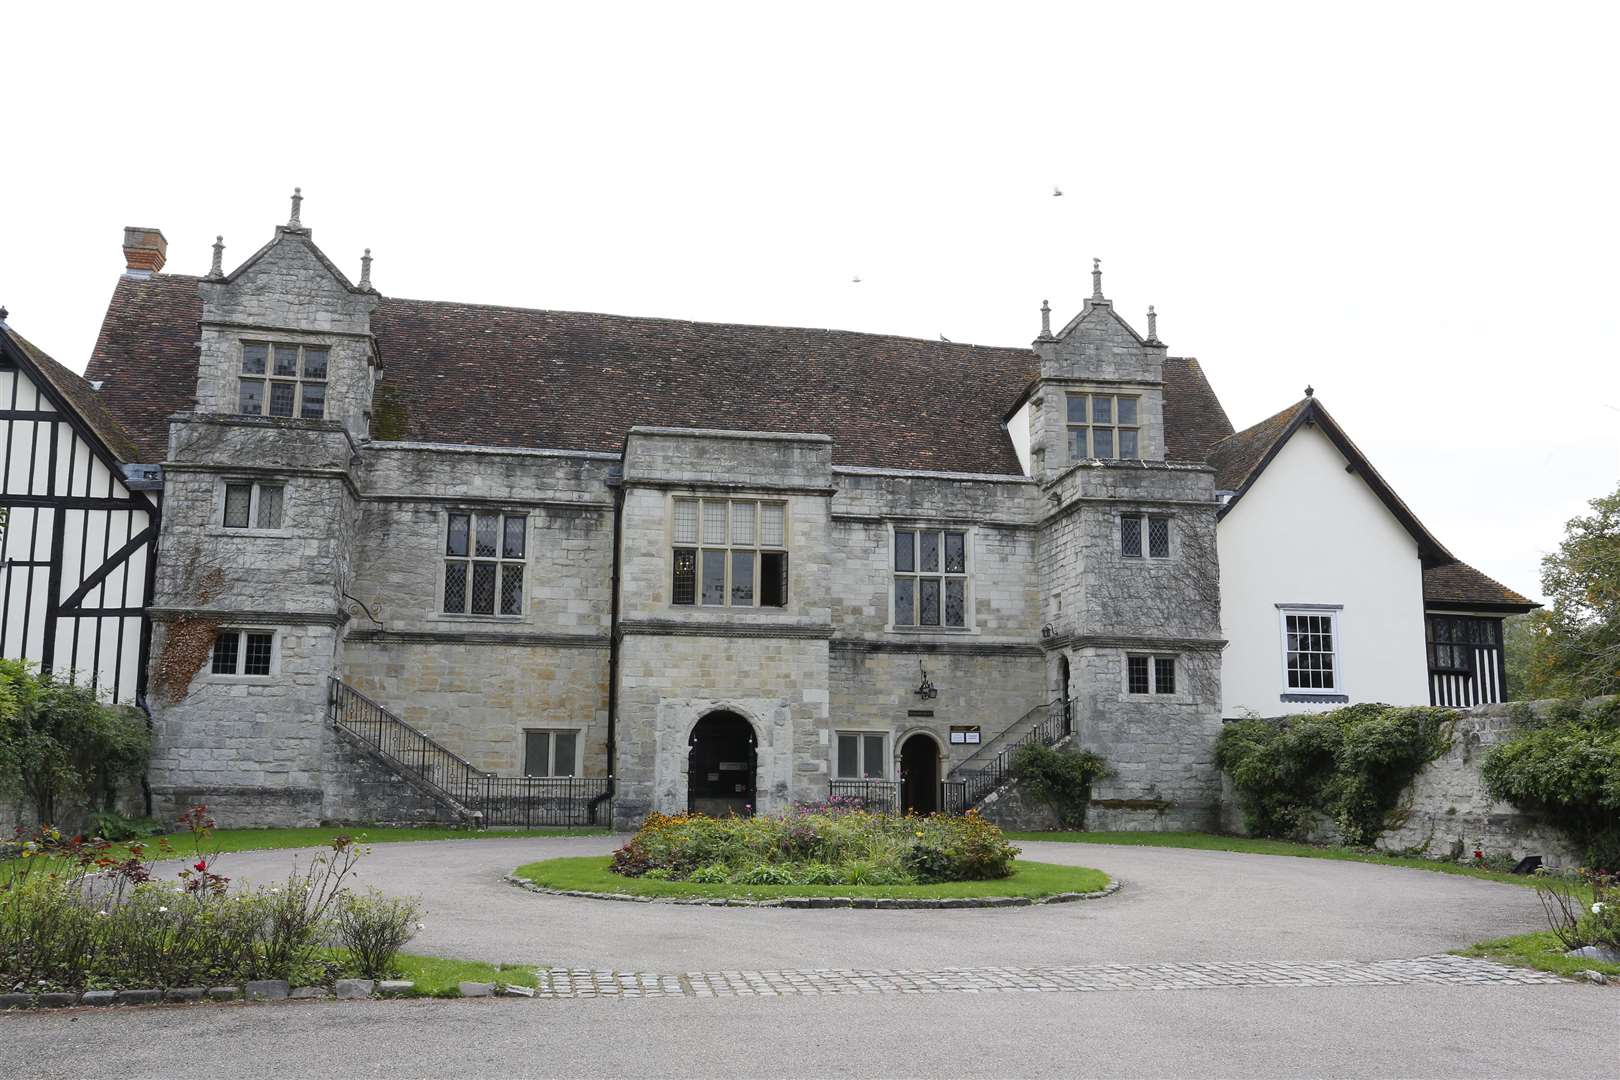 The hearing was at Archbishop's Palace in Maidstone